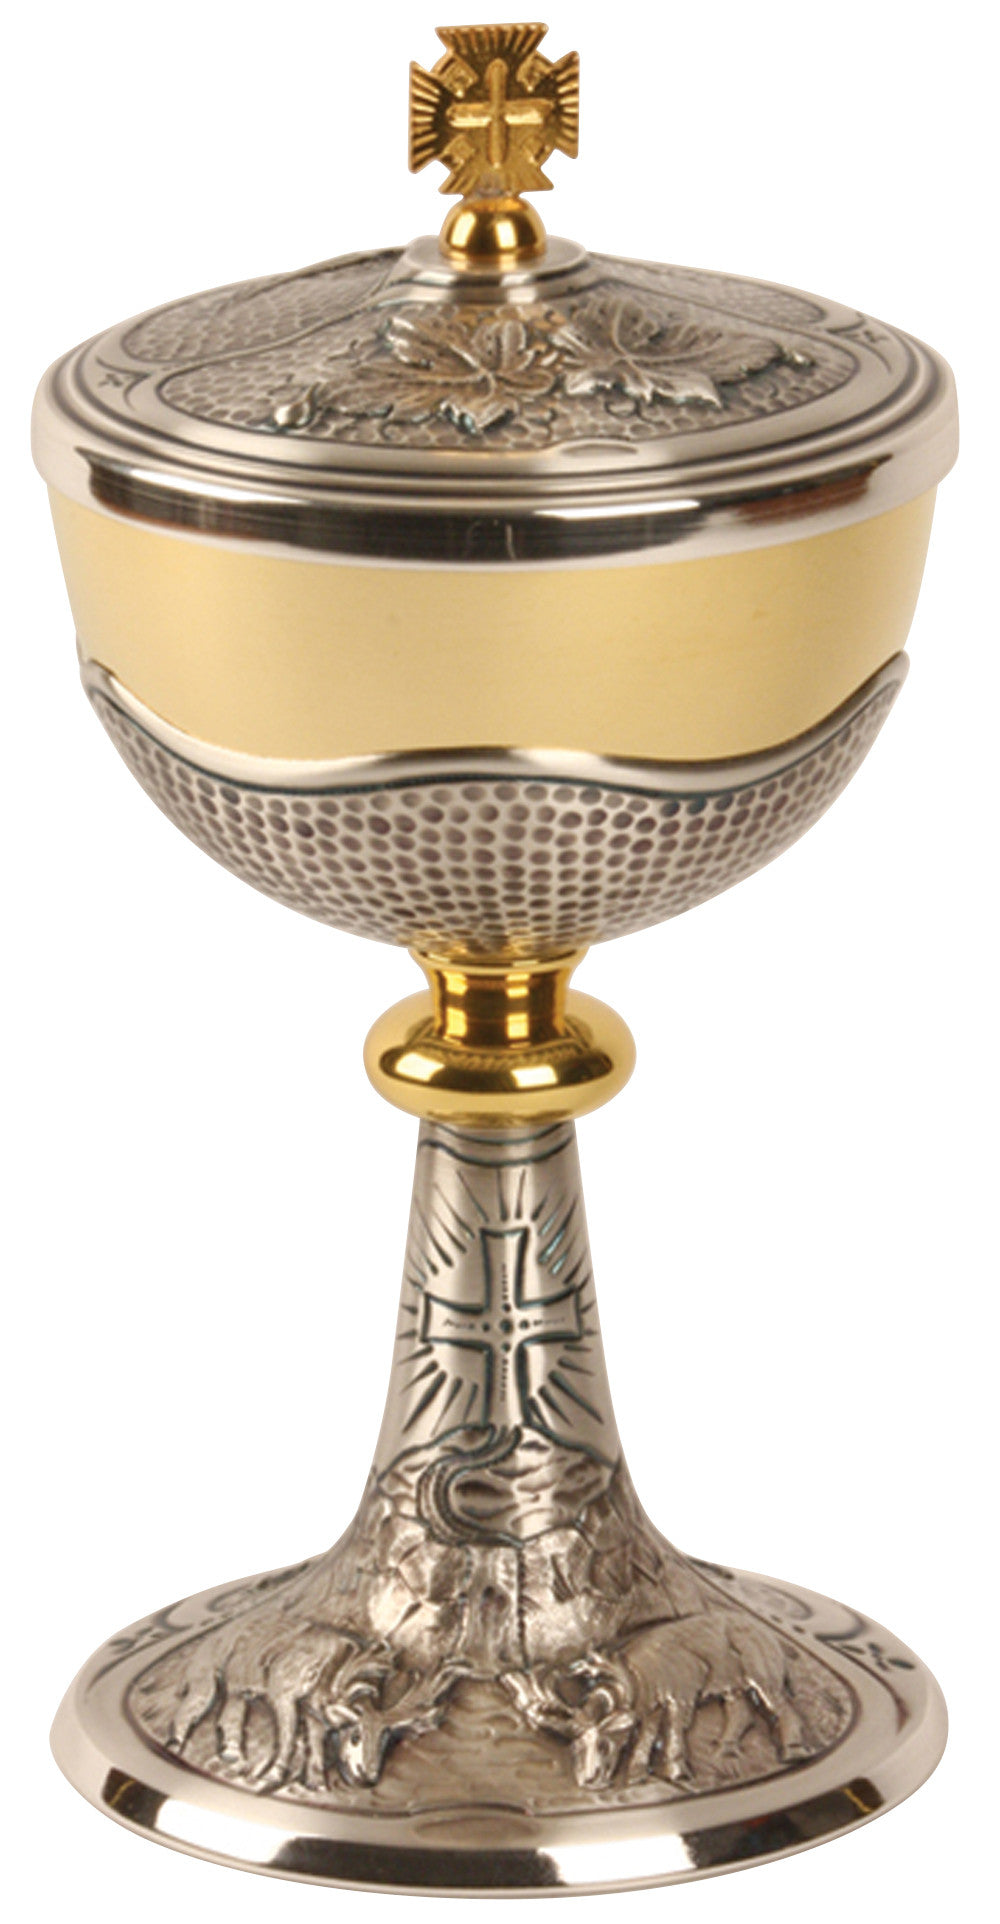 Chalice and Ciborium - Gold plated and Silver - Holy Spirit/Grapes/Leaf - Koleys - Chiarelli's Religious Goods & Church Supply